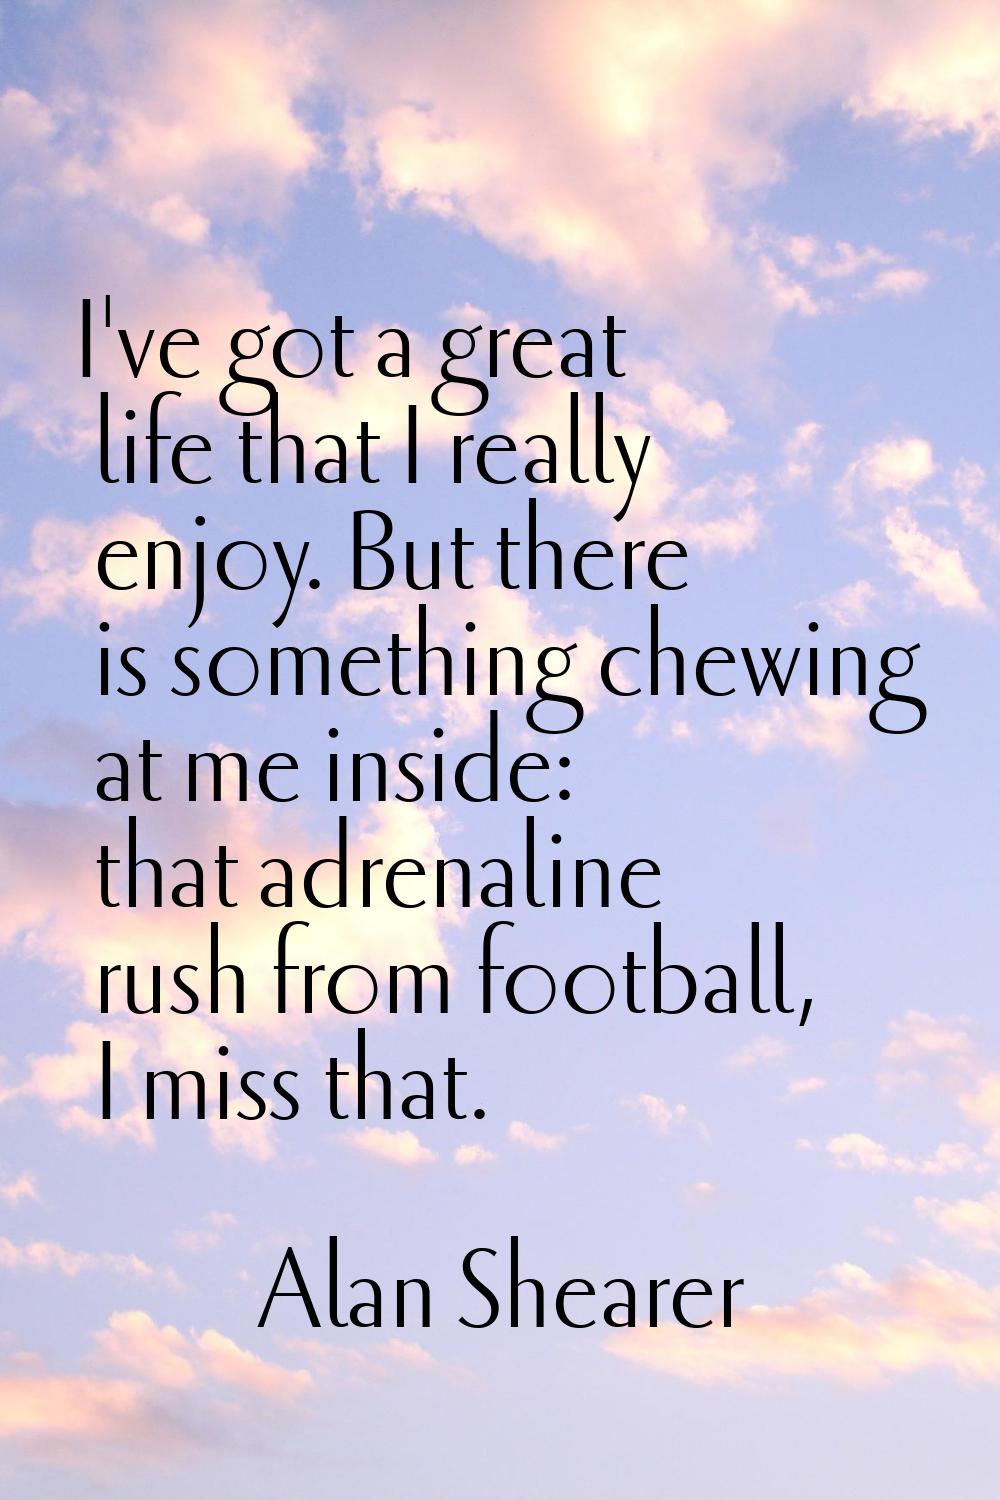 I've got a great life that I really enjoy. But there is something chewing at me inside: that adrena